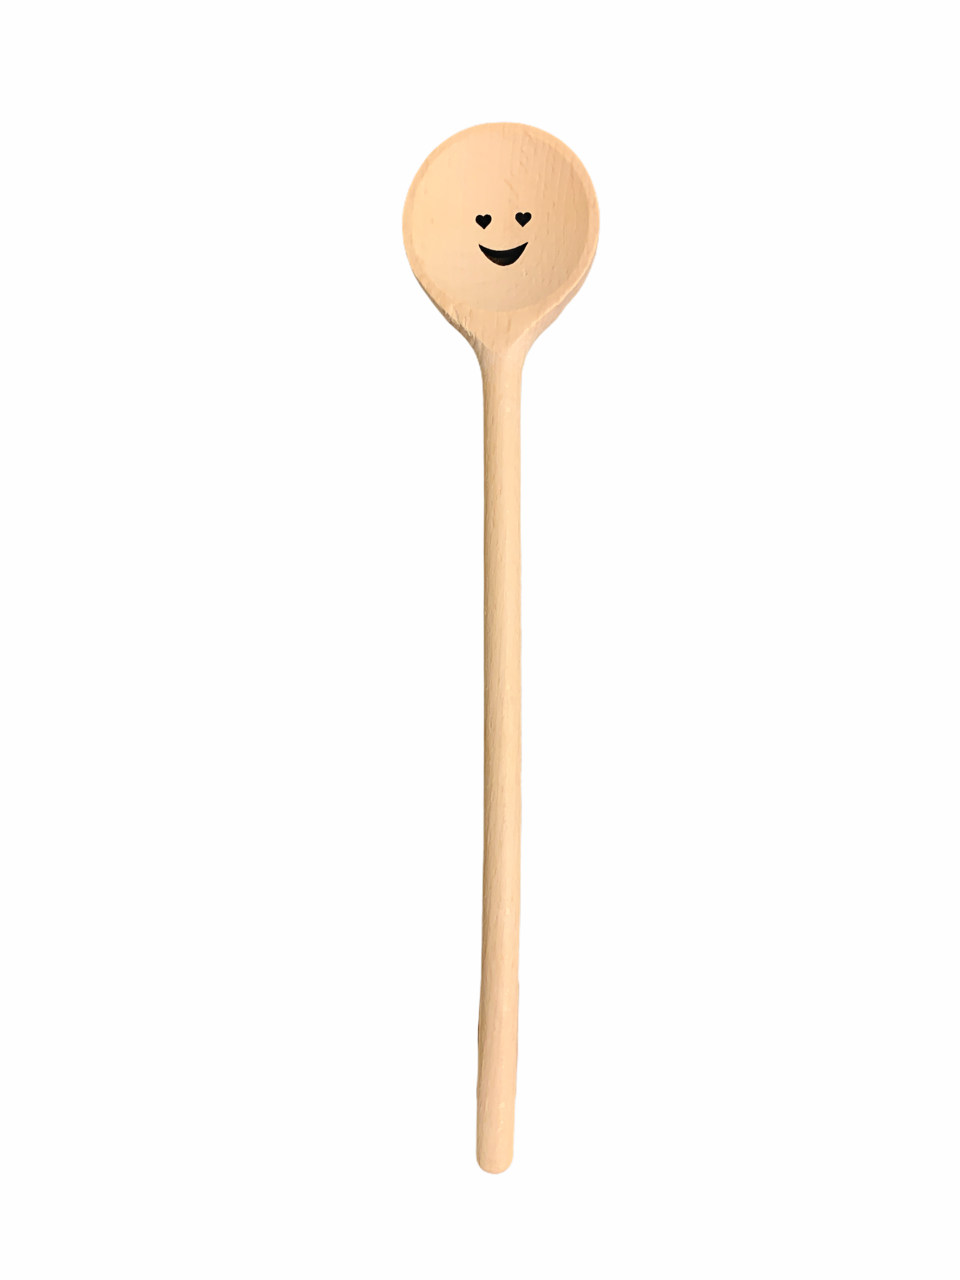 Lepel Hout Rond 30cm Smiley